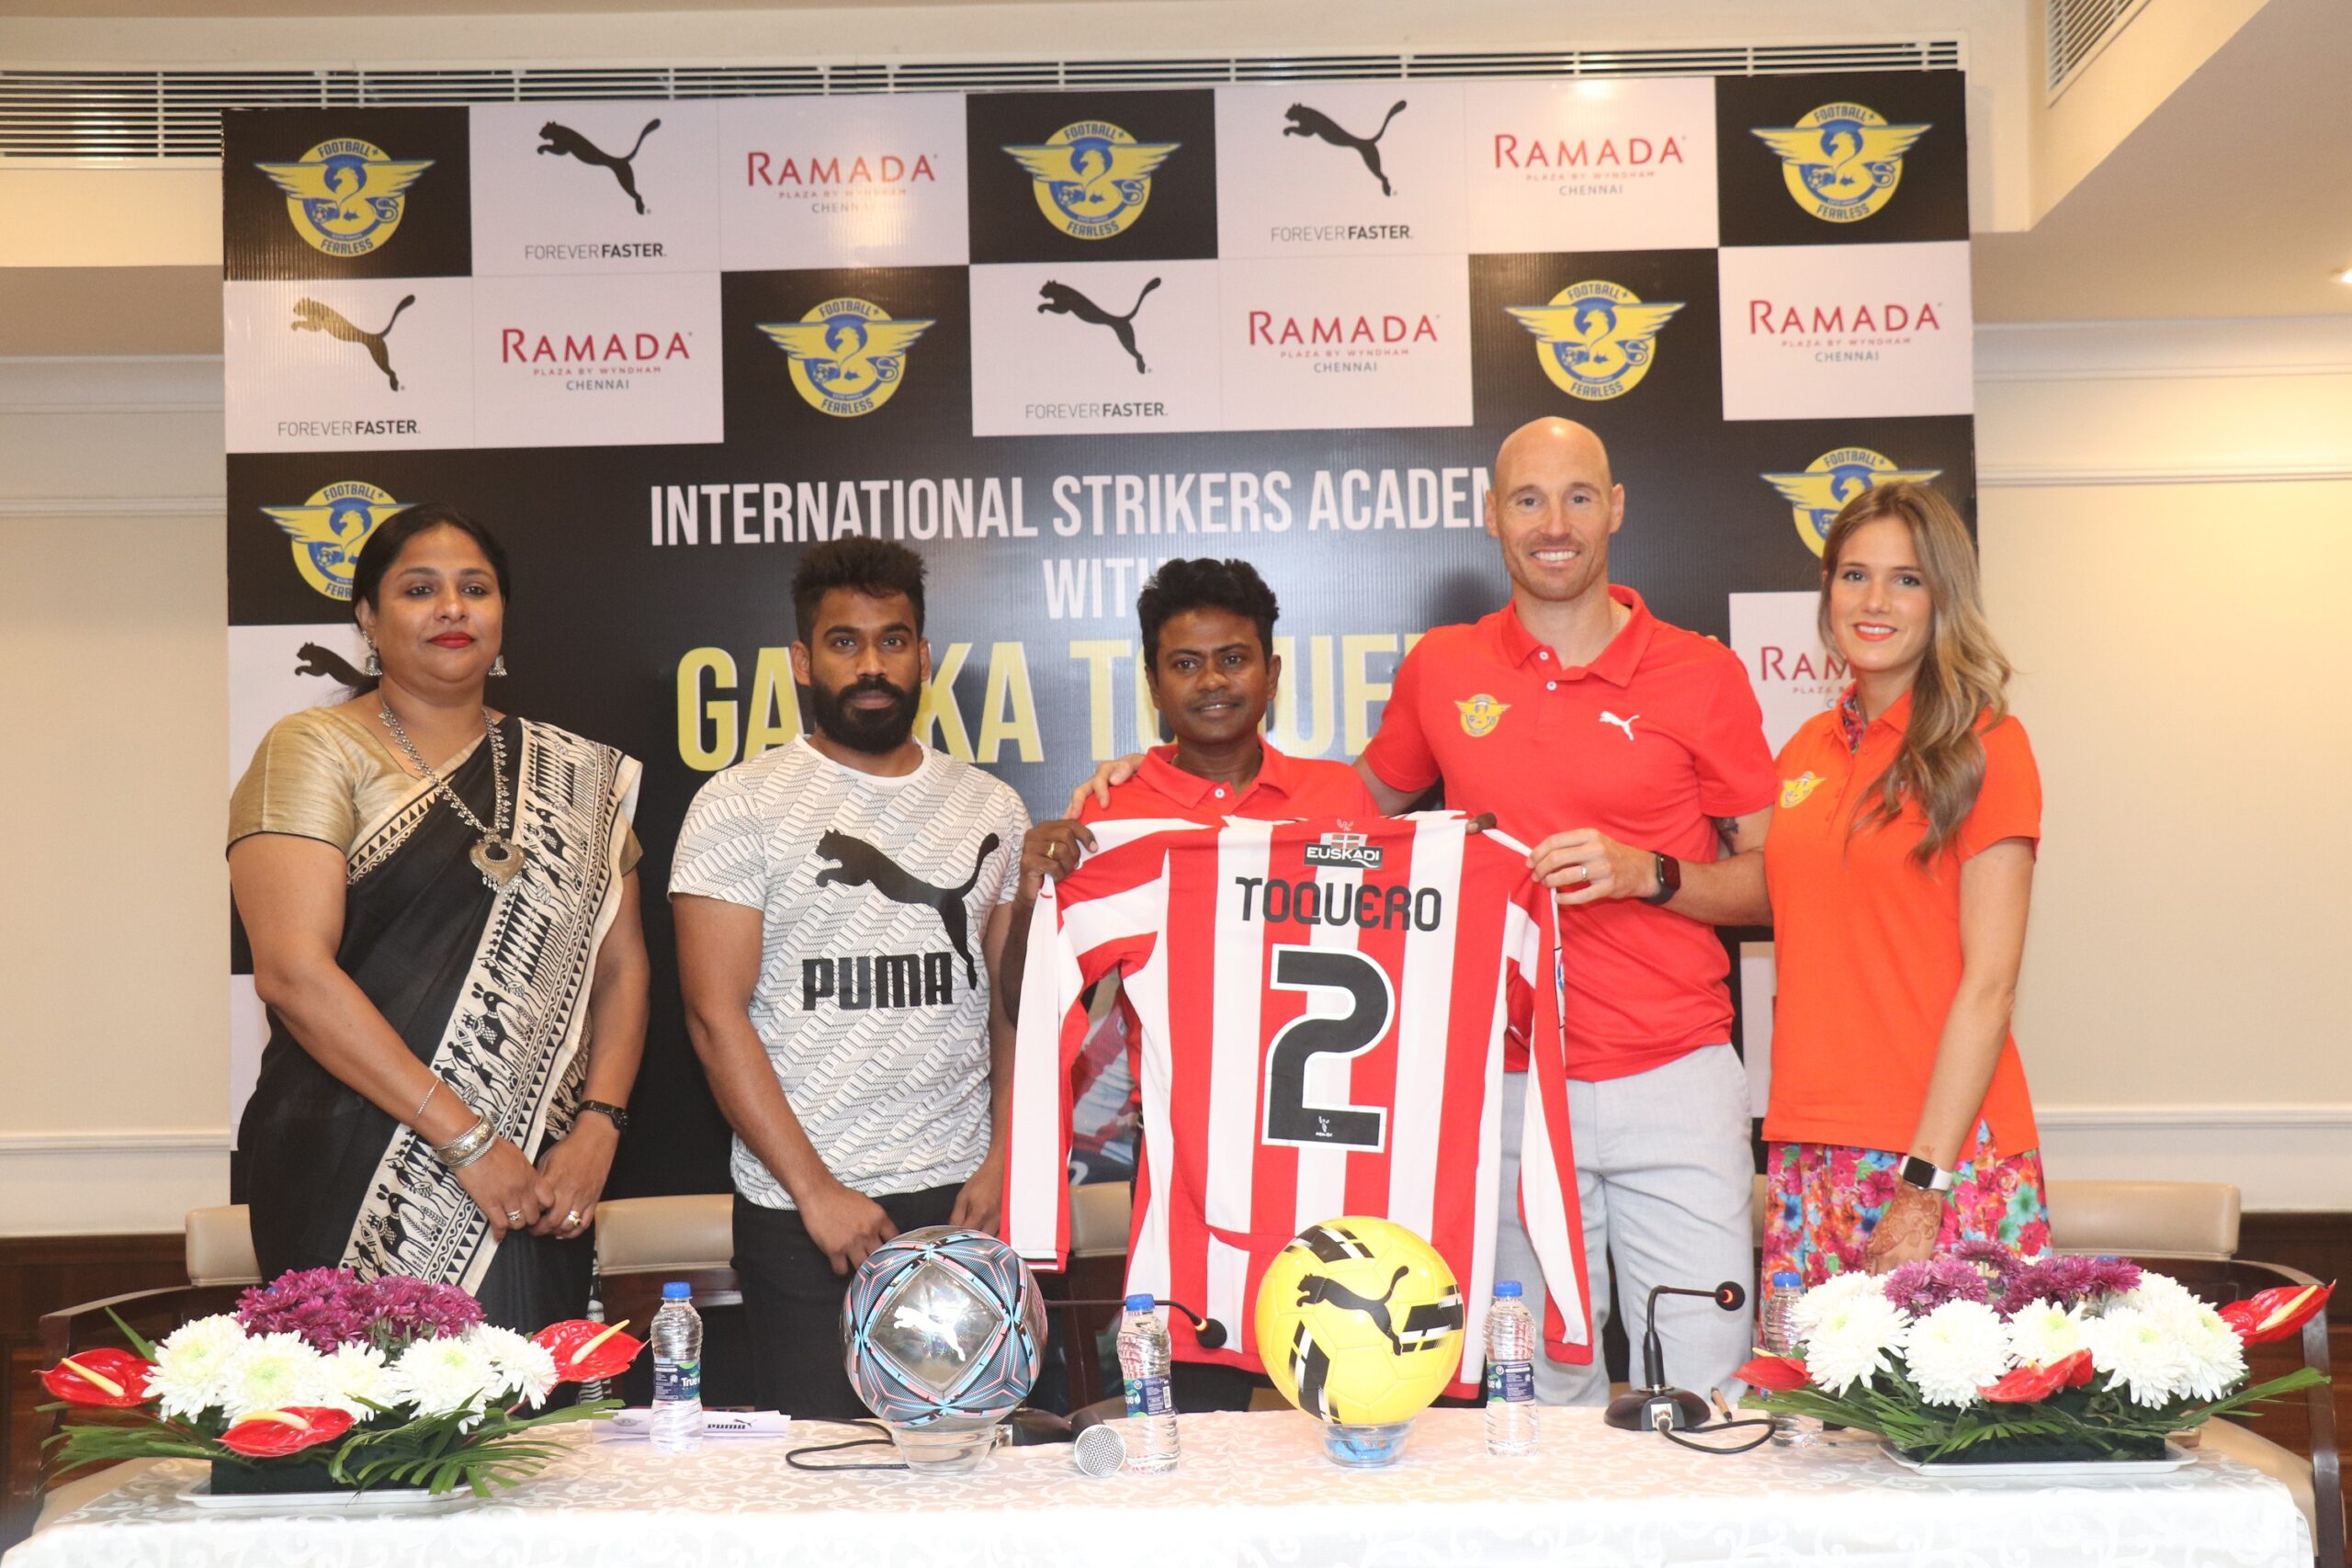 Football Plus soccer academy in association with PUMA inaugurated International Strikers Academy